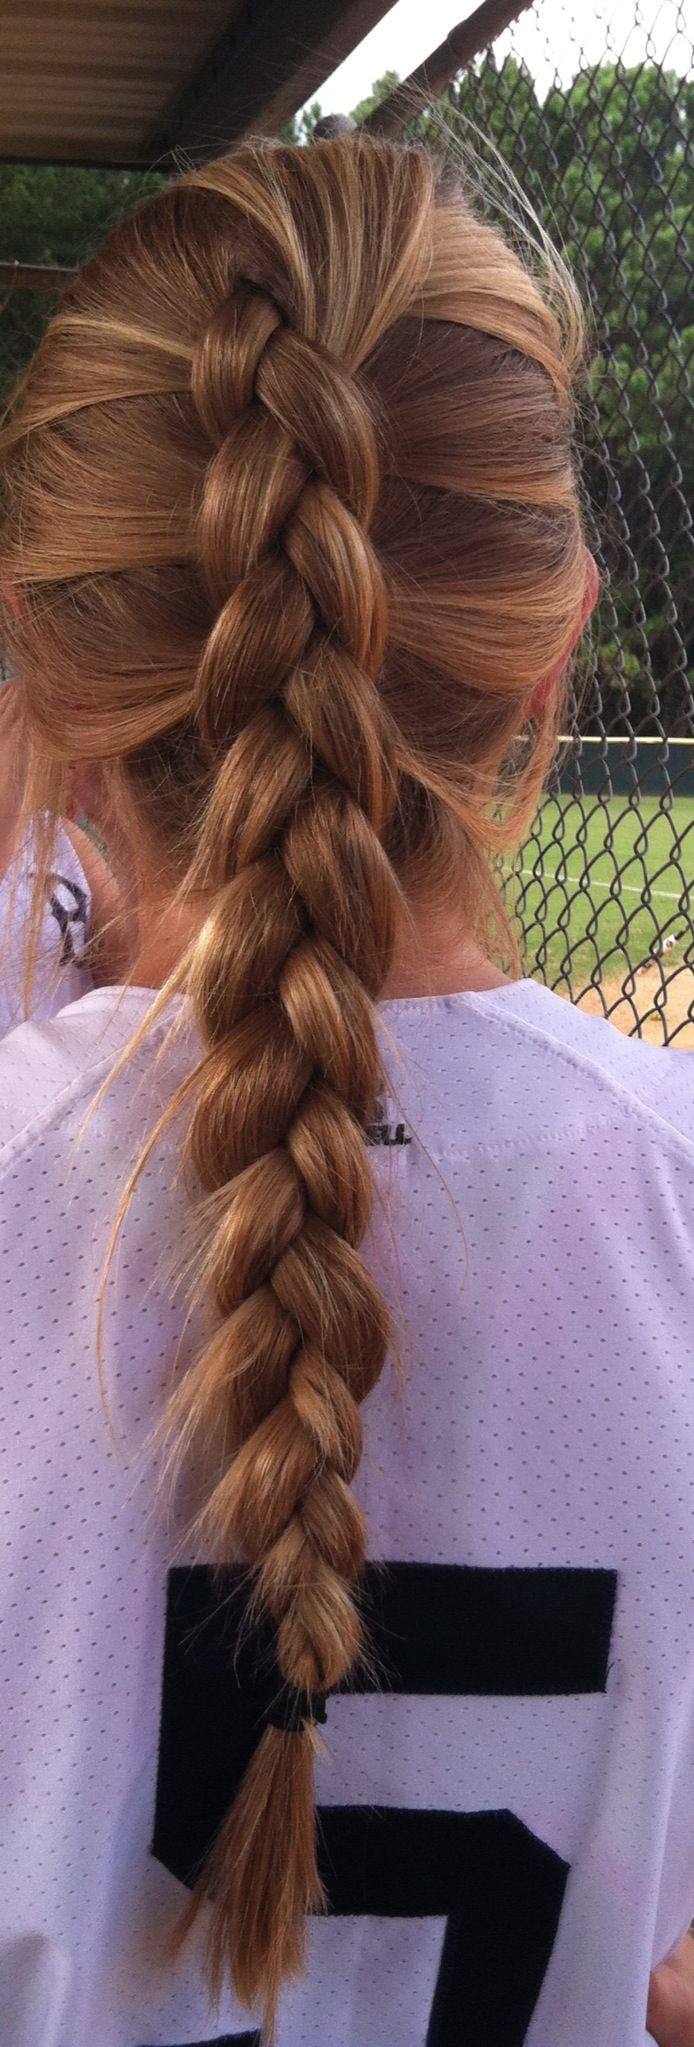 Cute Softball Hairstyles
 This is a French Braid s World